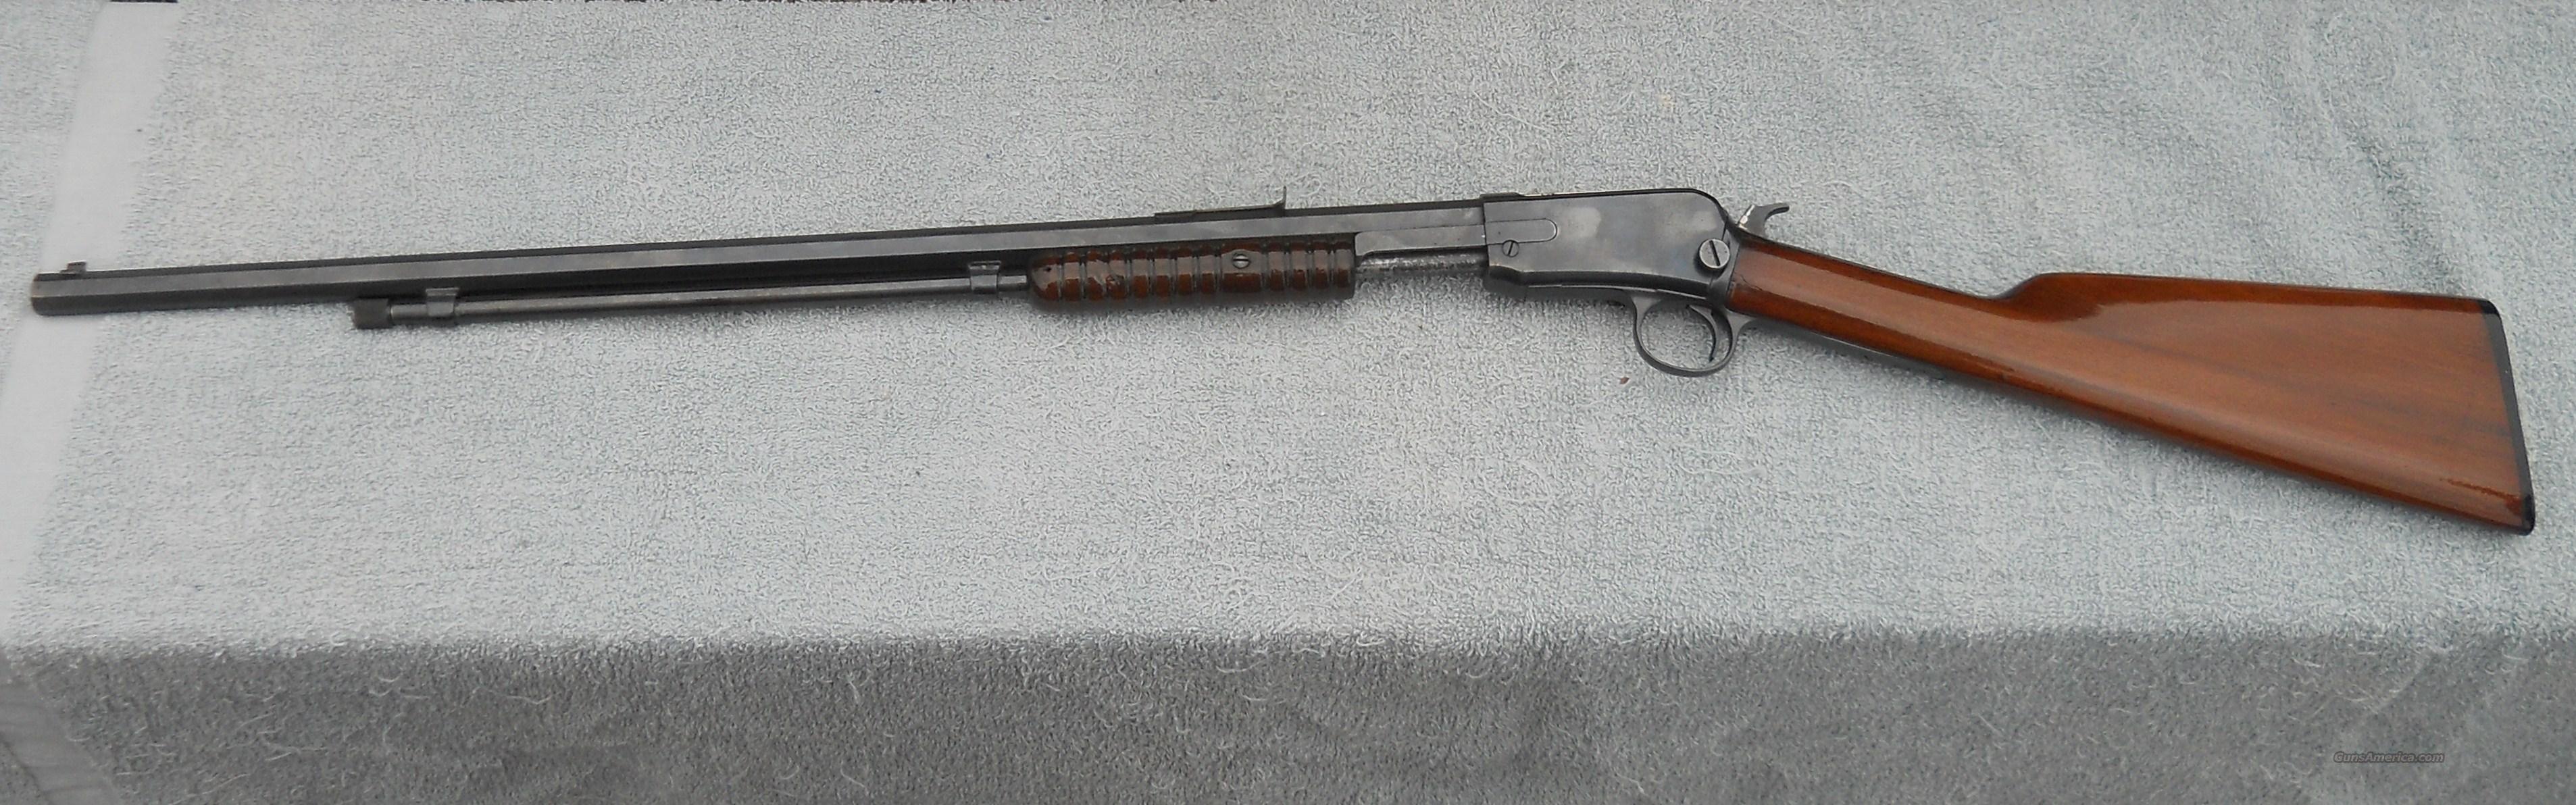 Winchester Model 1870 22 Long Pump For Sale At 971920951 1313